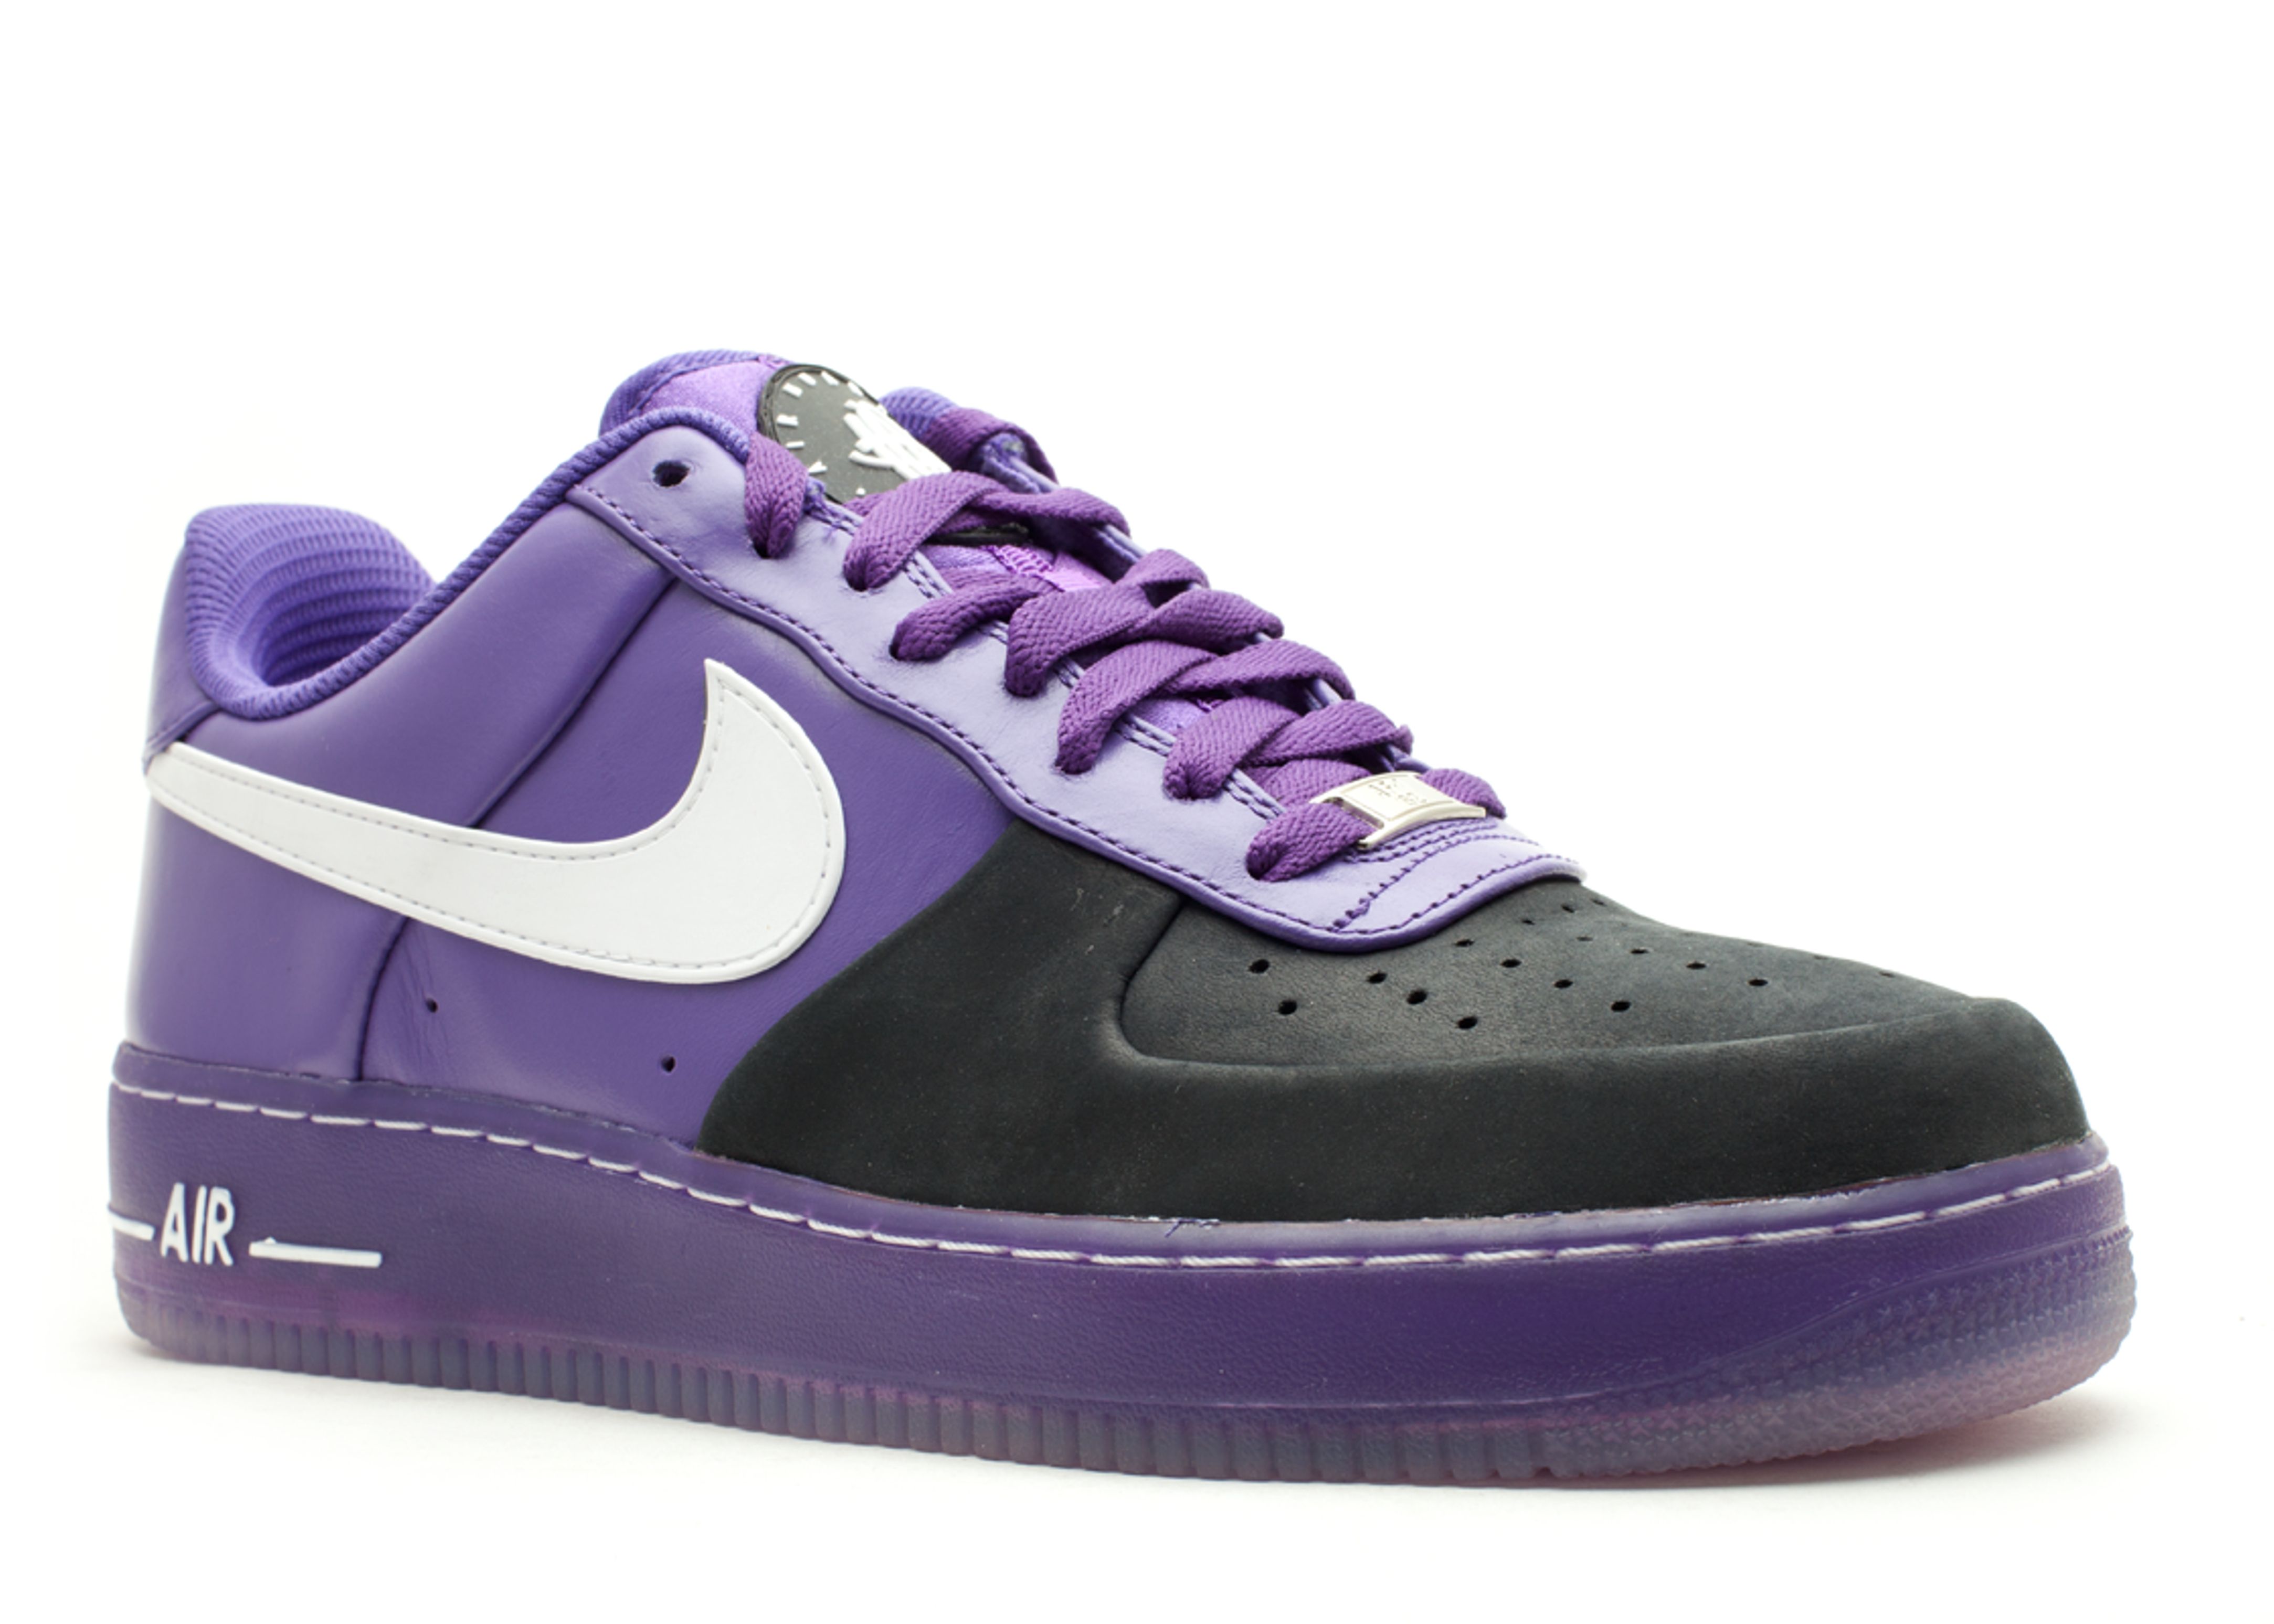 Air Force 1 Low Supreme Sp 09 'Hurache Asia Release' - Nike 